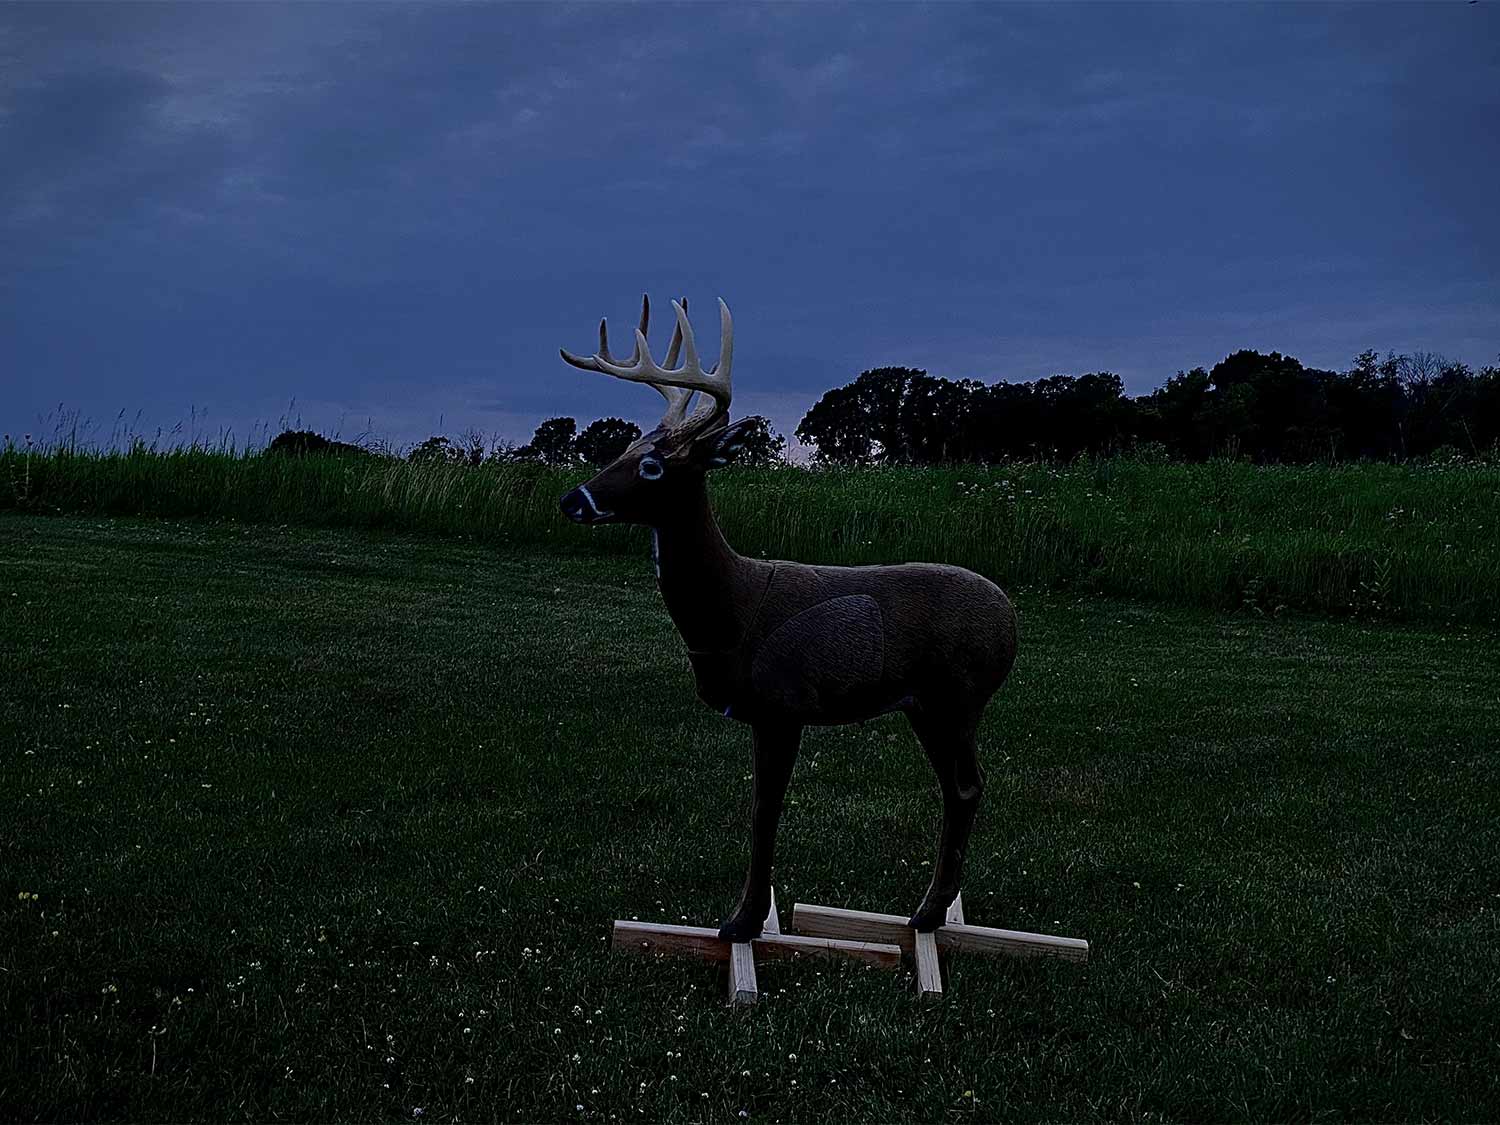 A deer hunting decoy in a field at night.